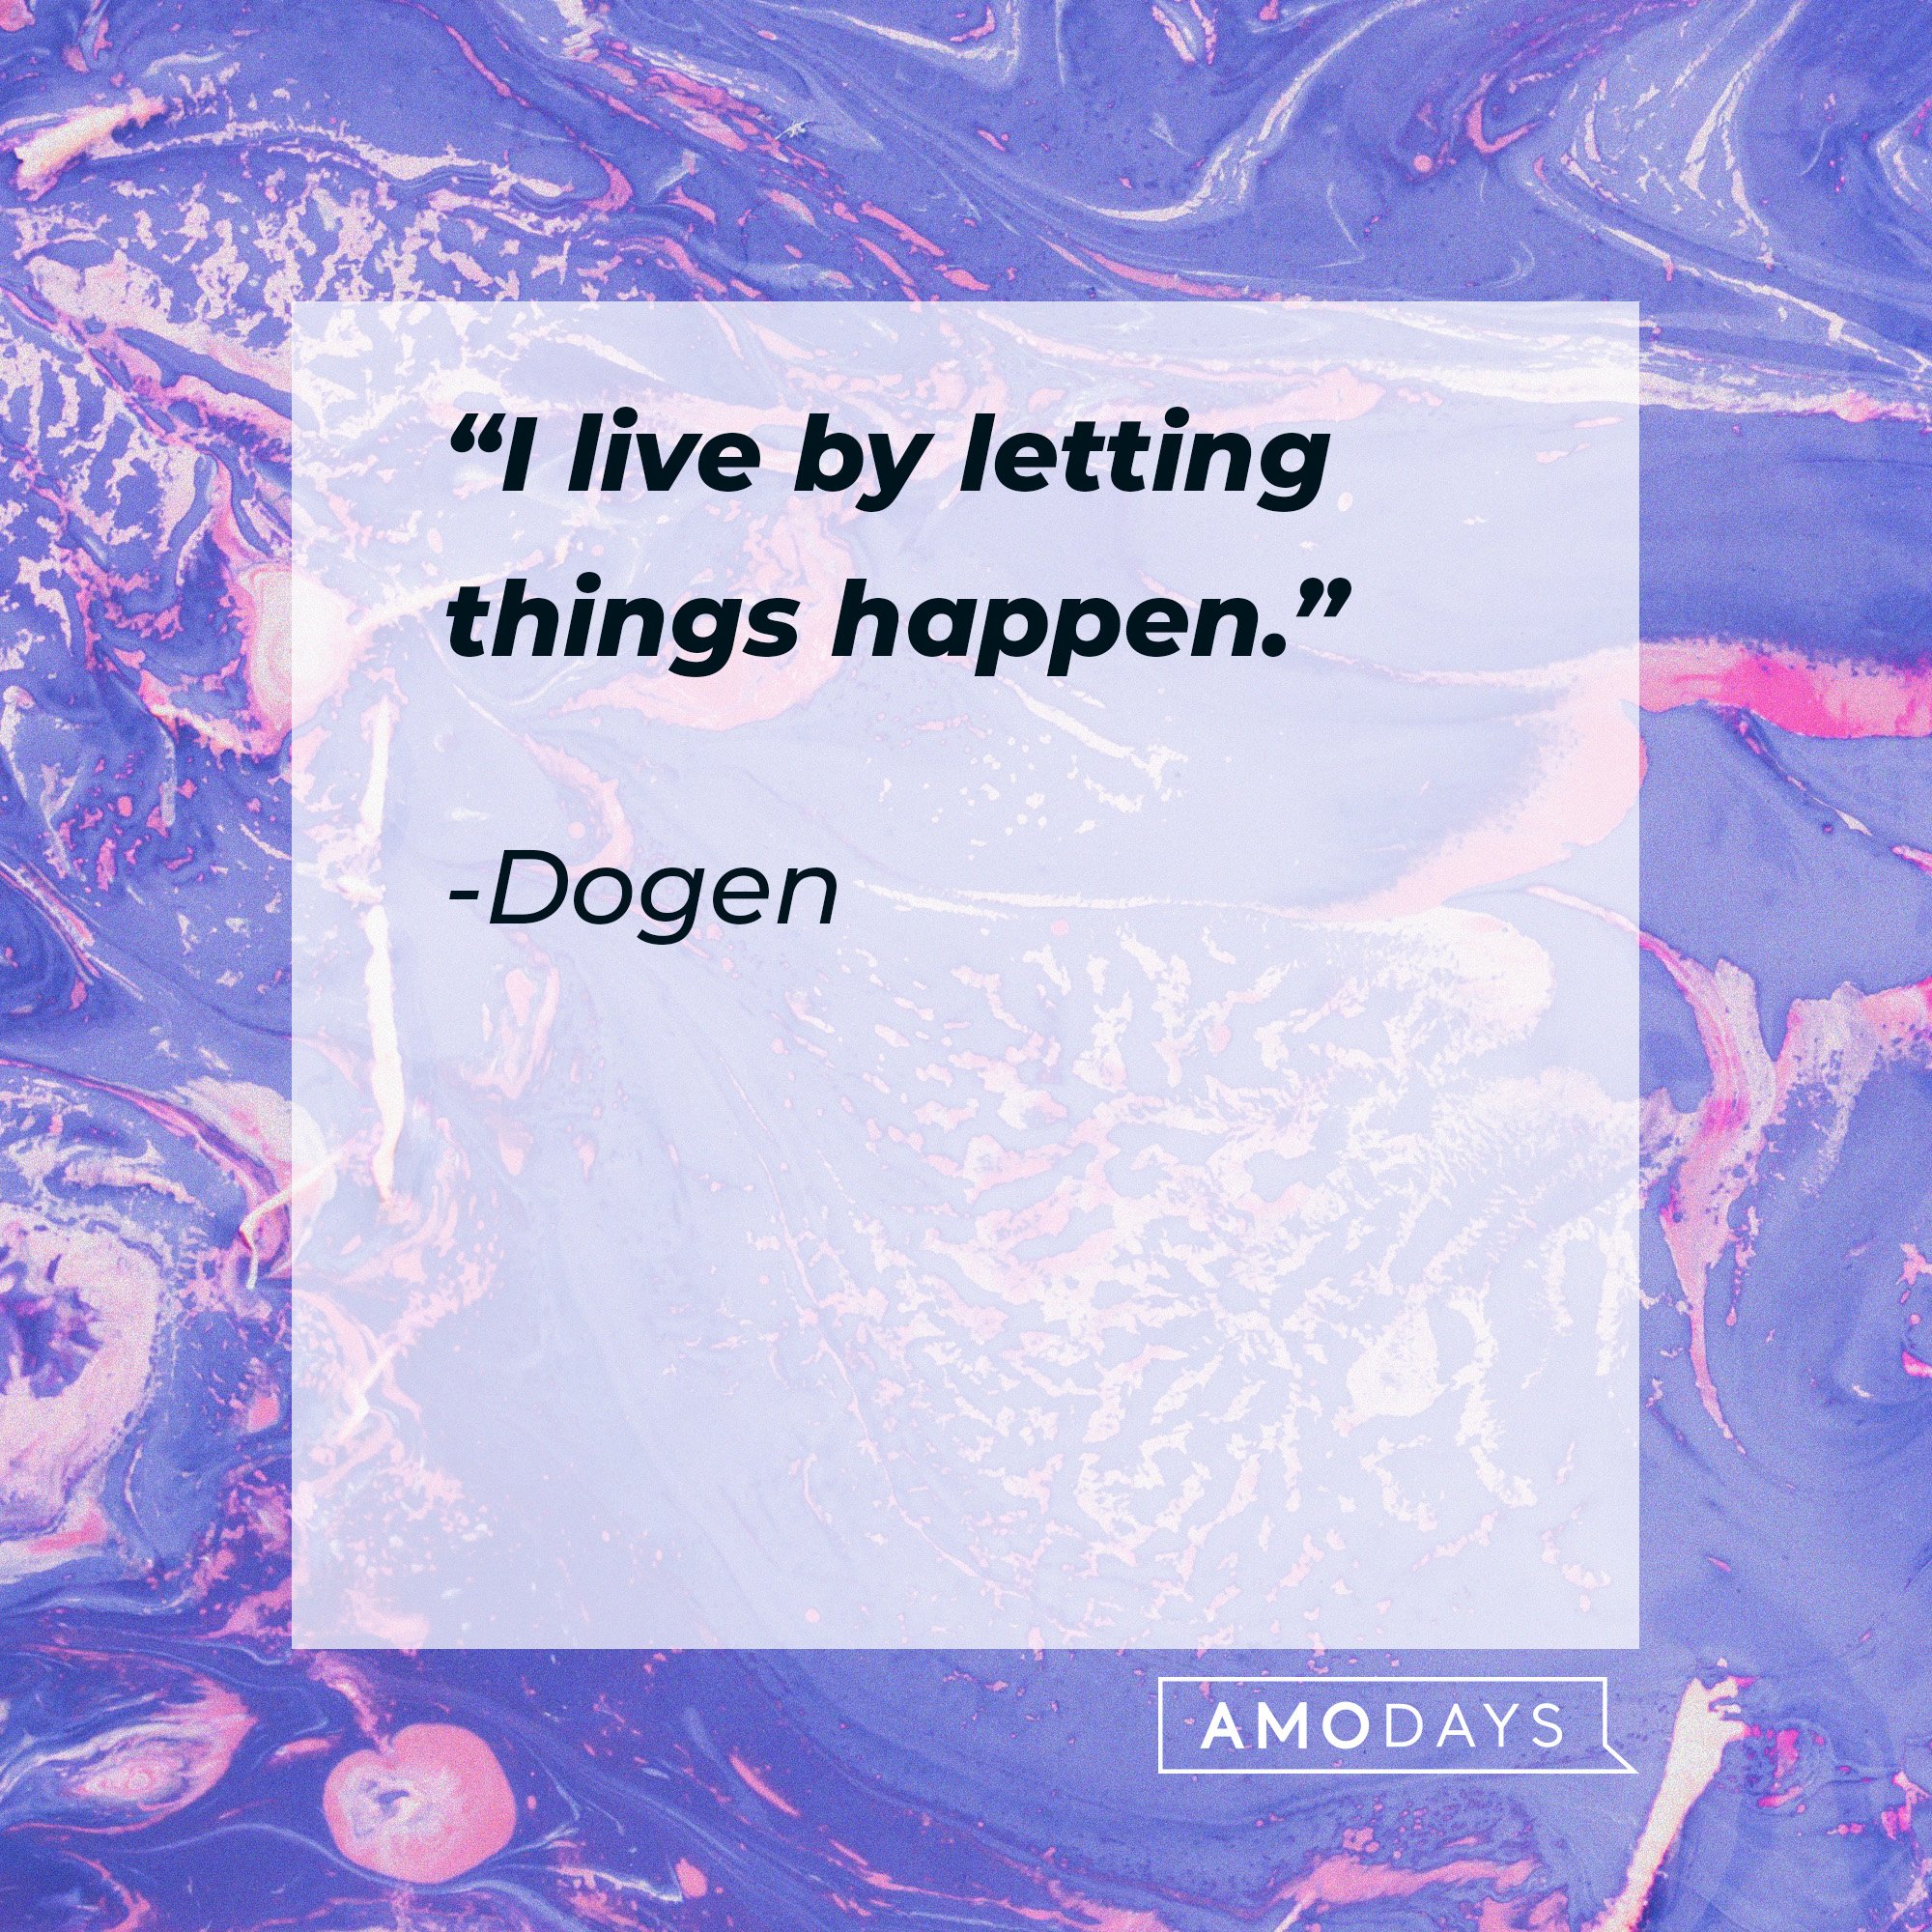 Dogen's quote: “I live by letting things happen.” | Image: AmoDays